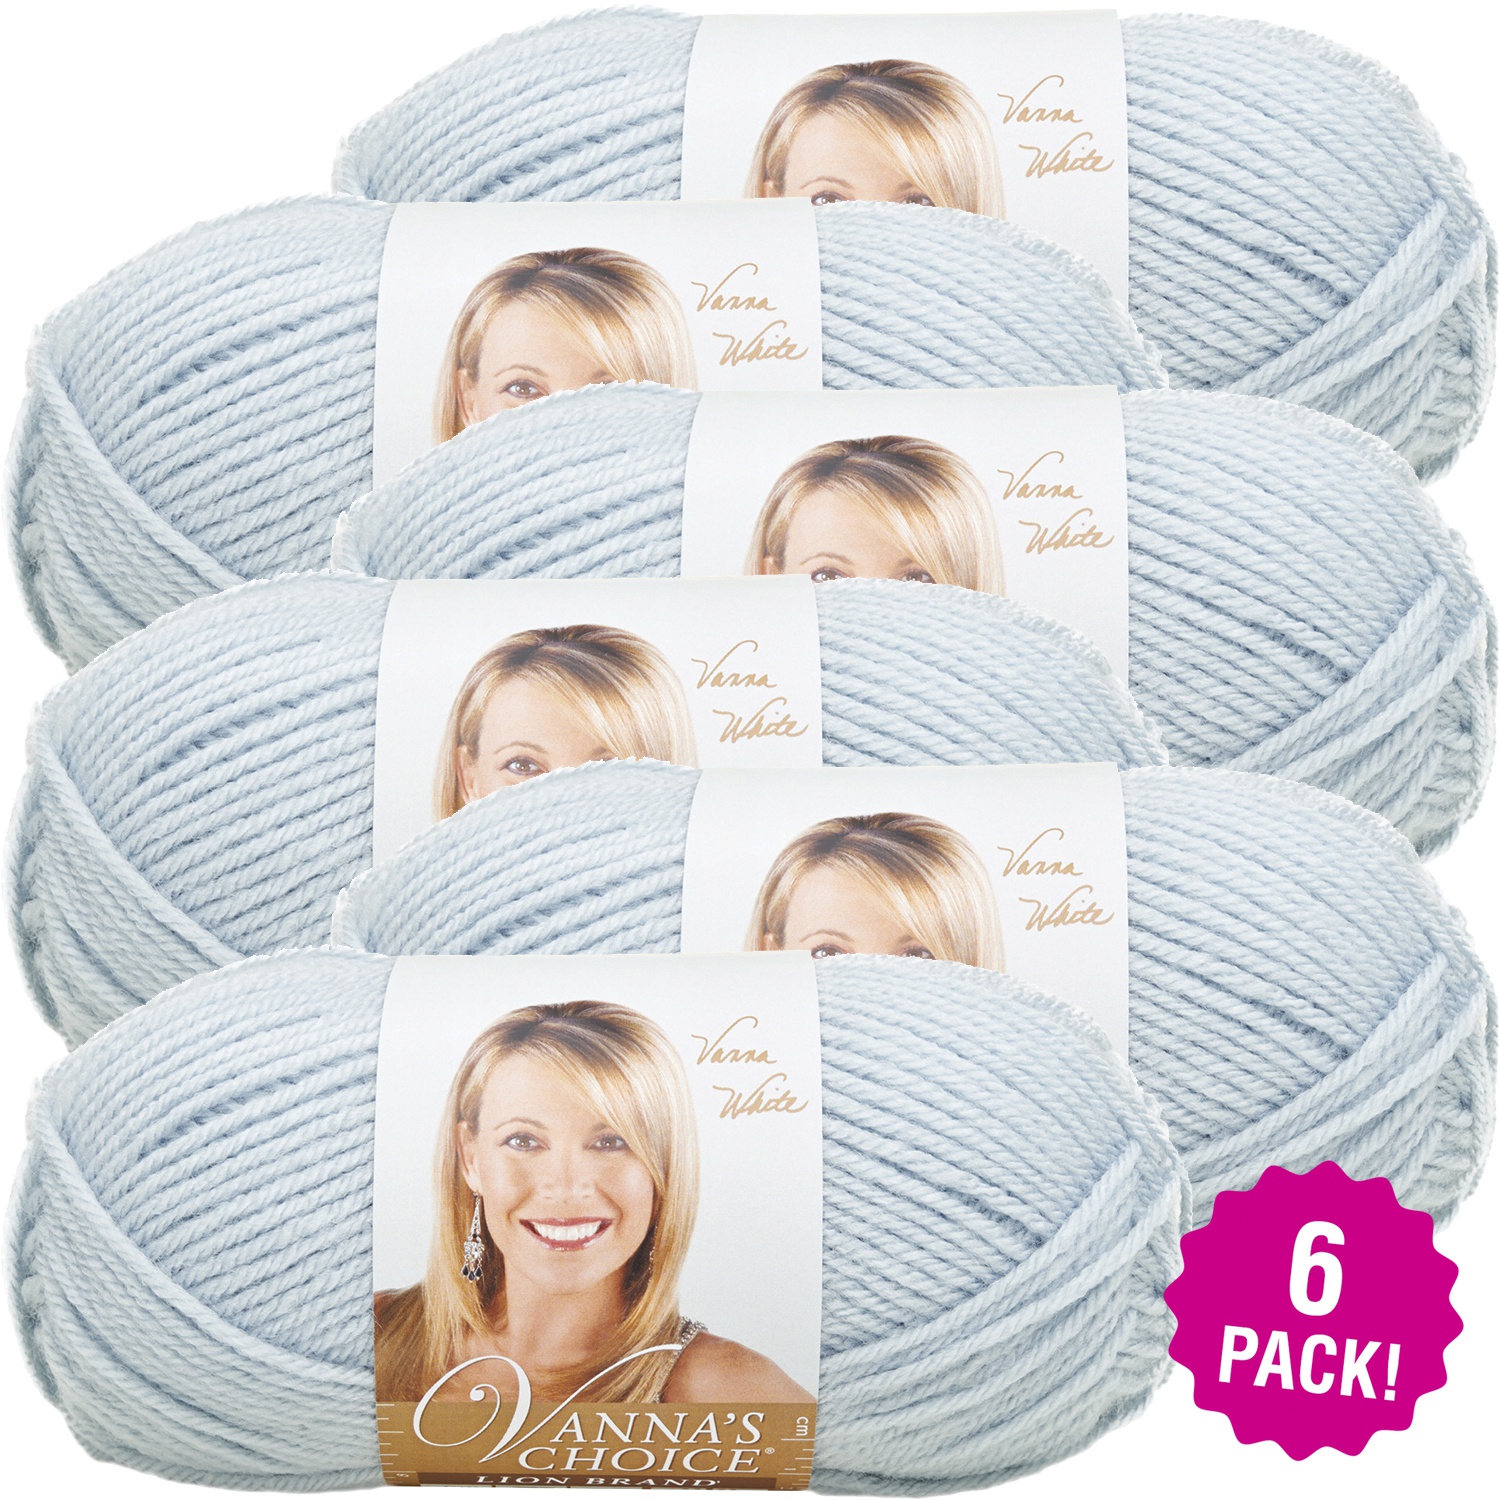 Lion Brand Vanna's Choice Yarn - Silver Blue, Multipack of 6